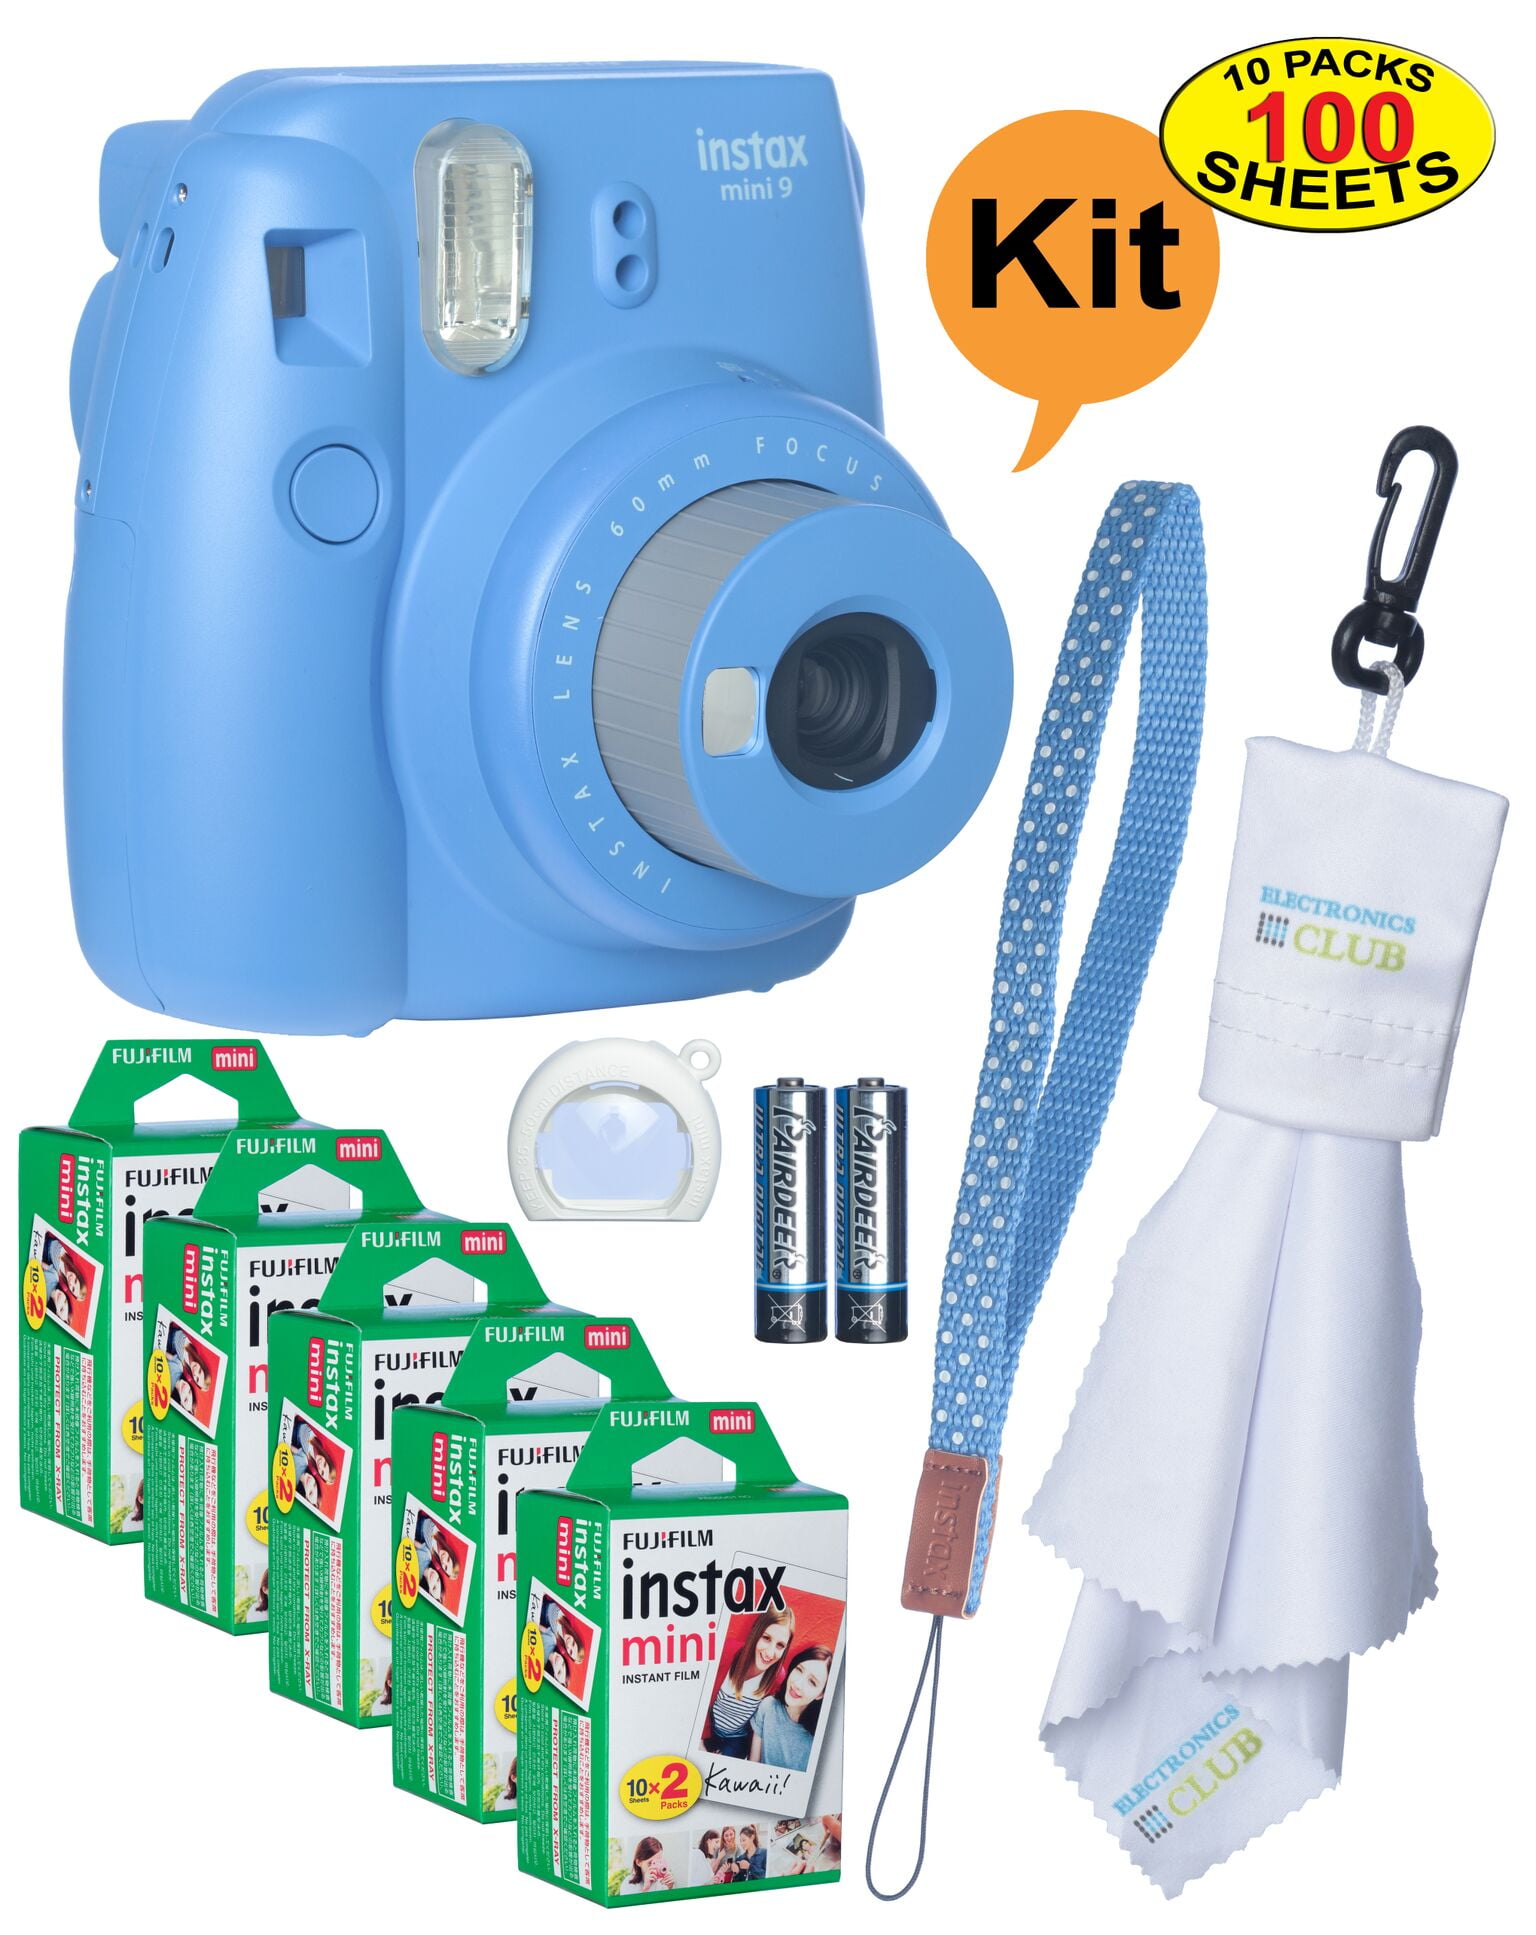 Fujifilm Instax Mini 9 Instant Film Camera + 100 Sheets of Instant Film + Lens Cleaning Cloth + Close-Up Selfie Lens Wrist Strap | Batteries Included - - Walmart.com